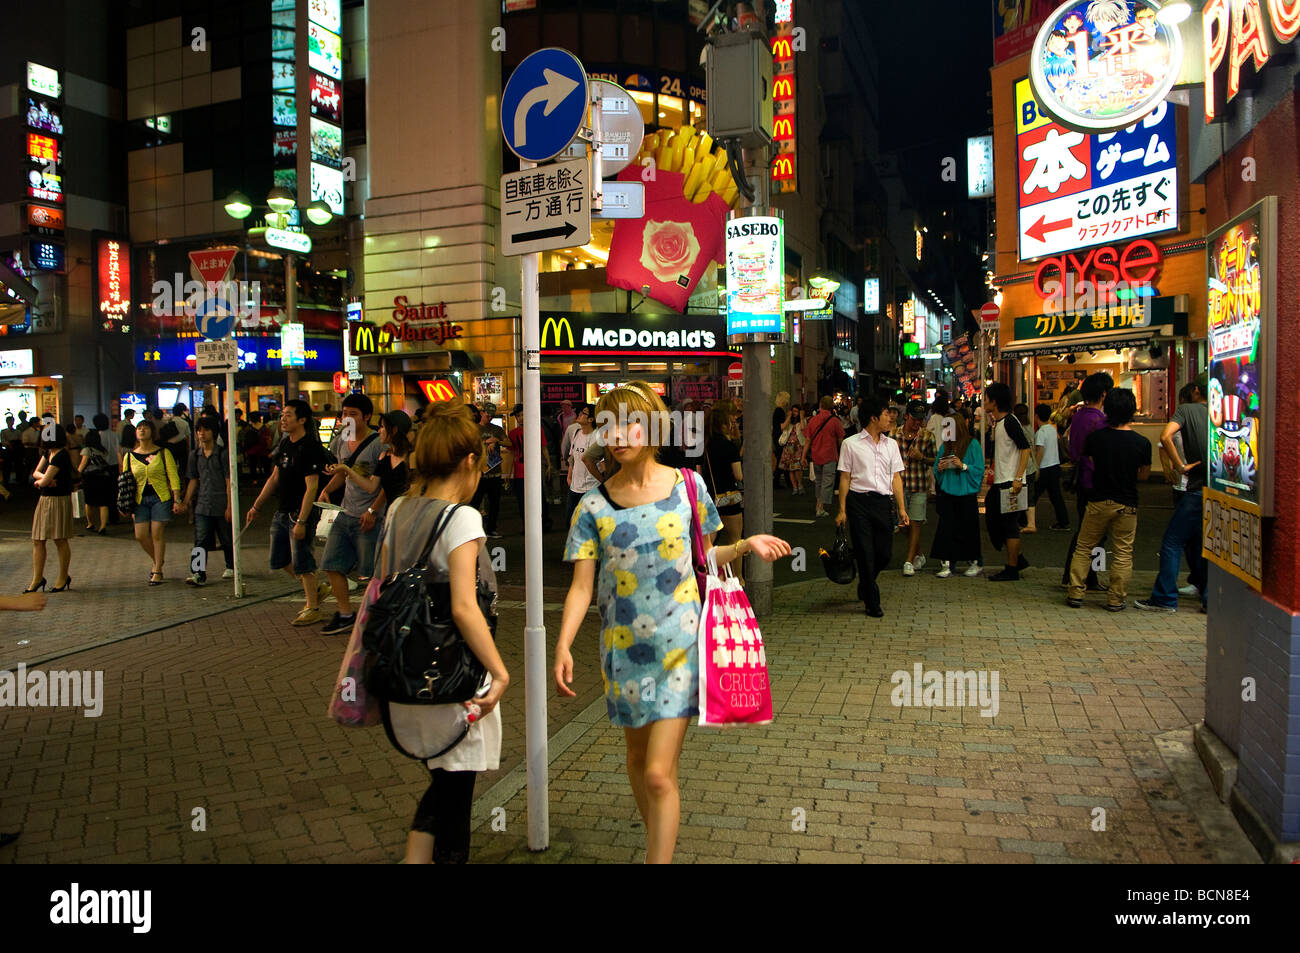 Pedestrians at a bustling shopping street in Shibuya district Tokyo Japan Stock Photo